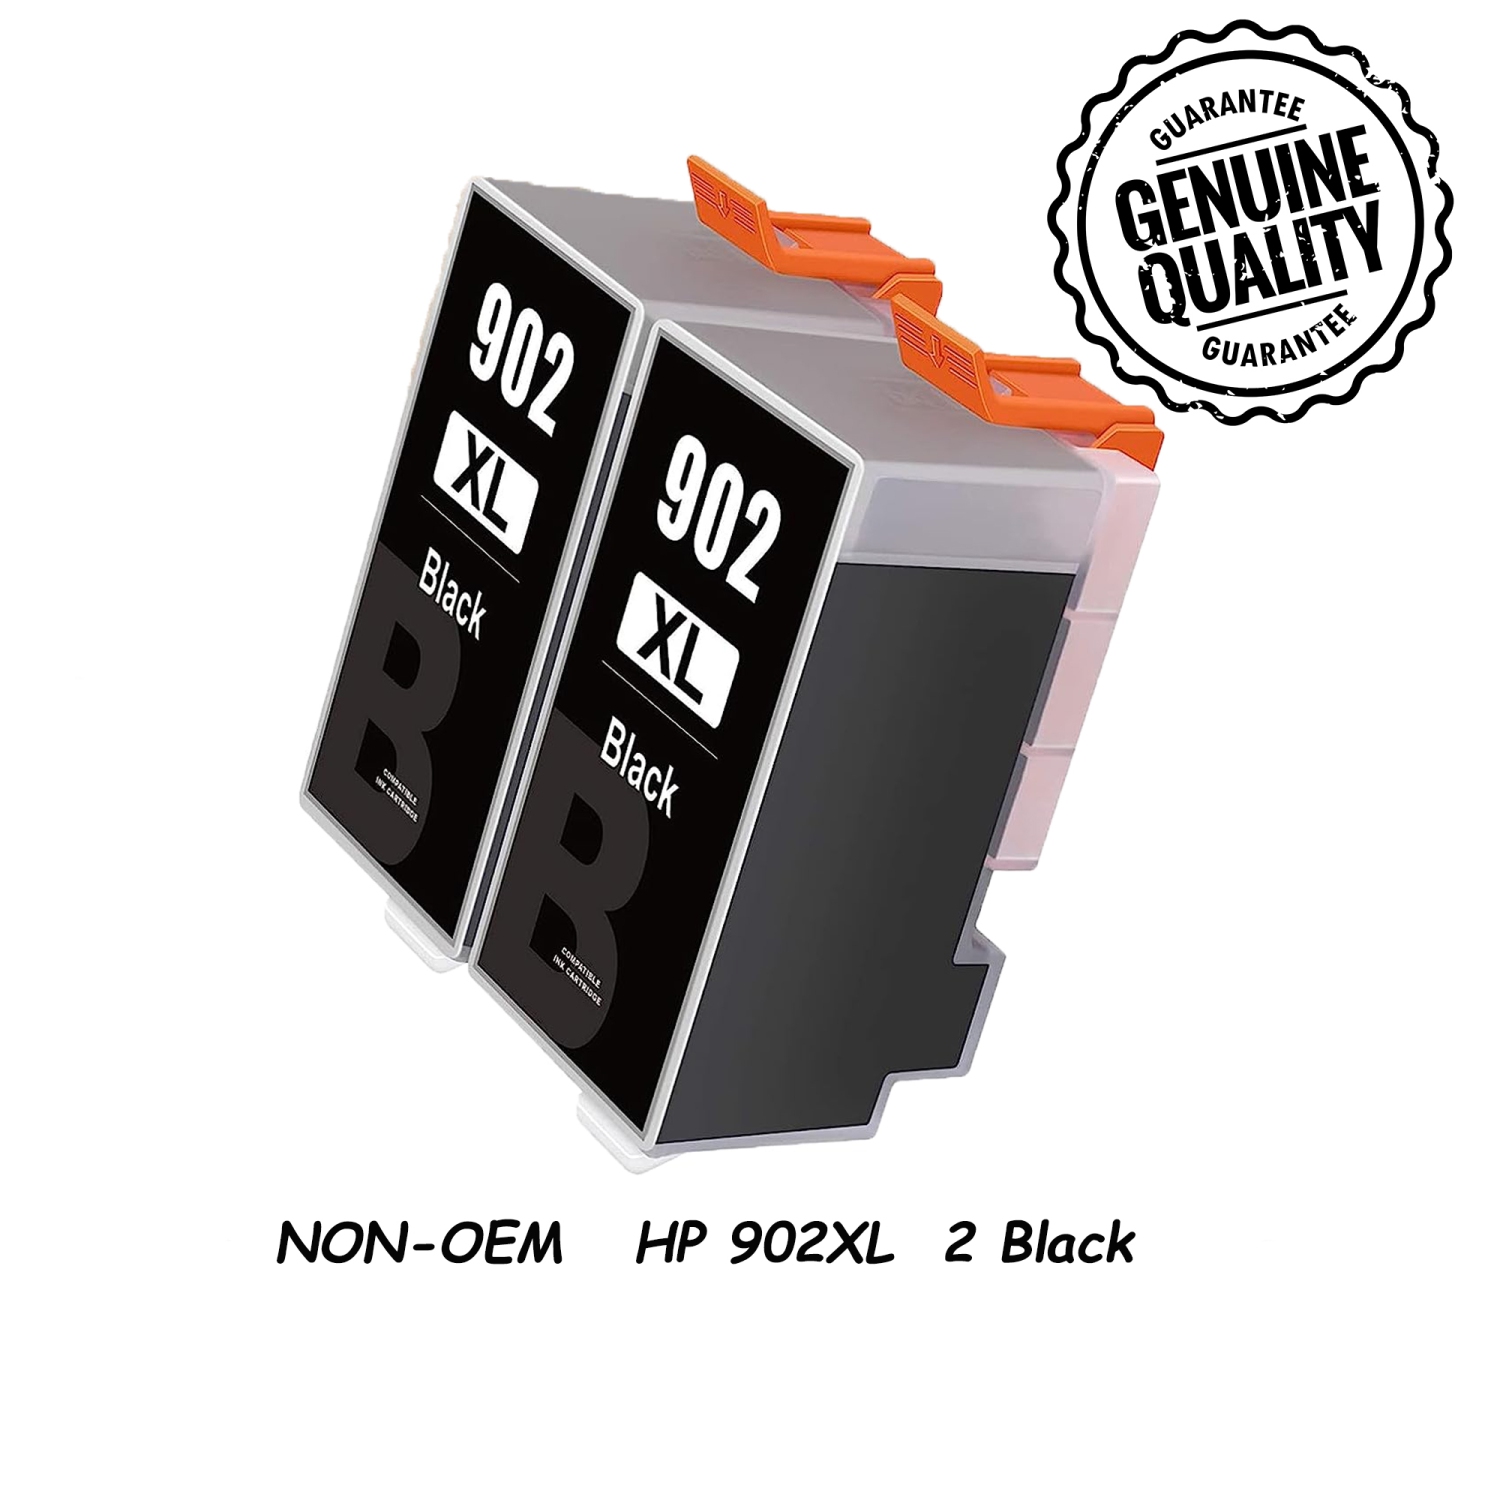 [New Chip] 2 Black Compatible HP 902 XL Ink Cartridges 902XL High Yield - HP OfficeJet 6950,6951,6954,6956,6962,6958,6900,6960,6965,6968,6970,6975,6978,6979,6961,6966, 6971